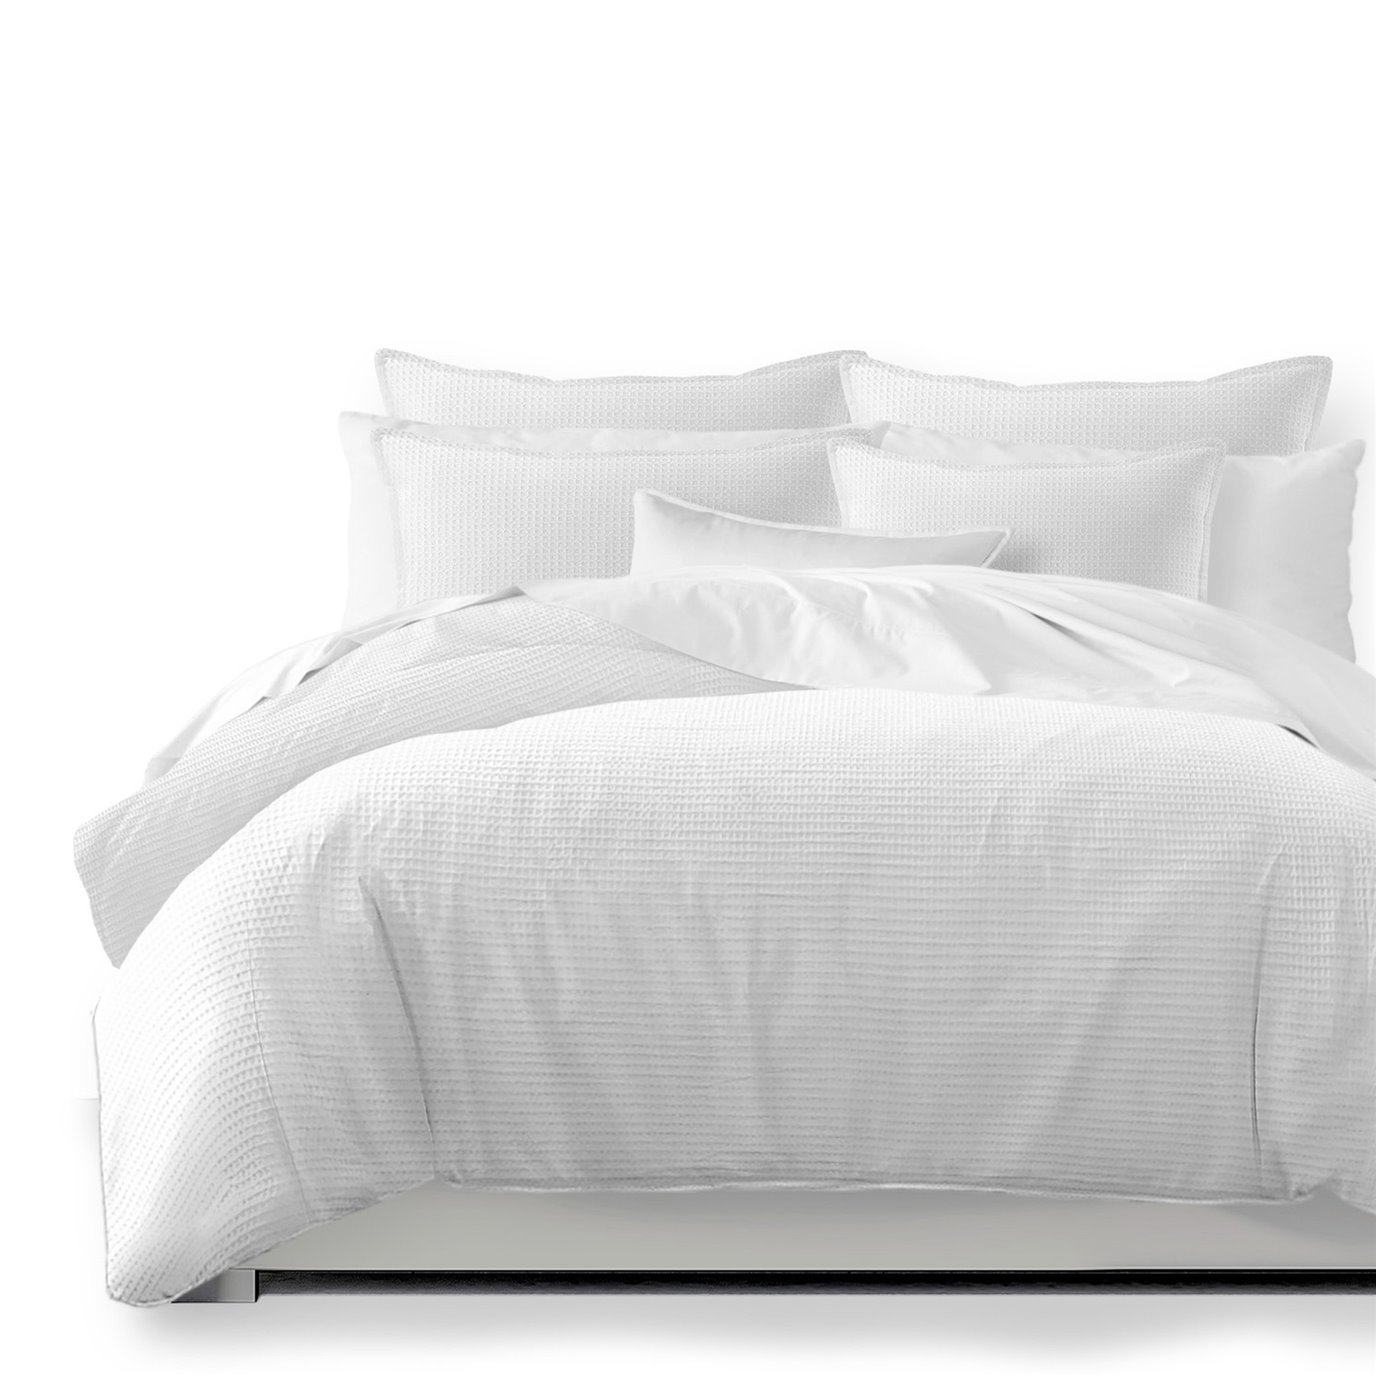 Classic Waffle White Duvet Cover and Pillow Sham(s) Set - Size King / California King